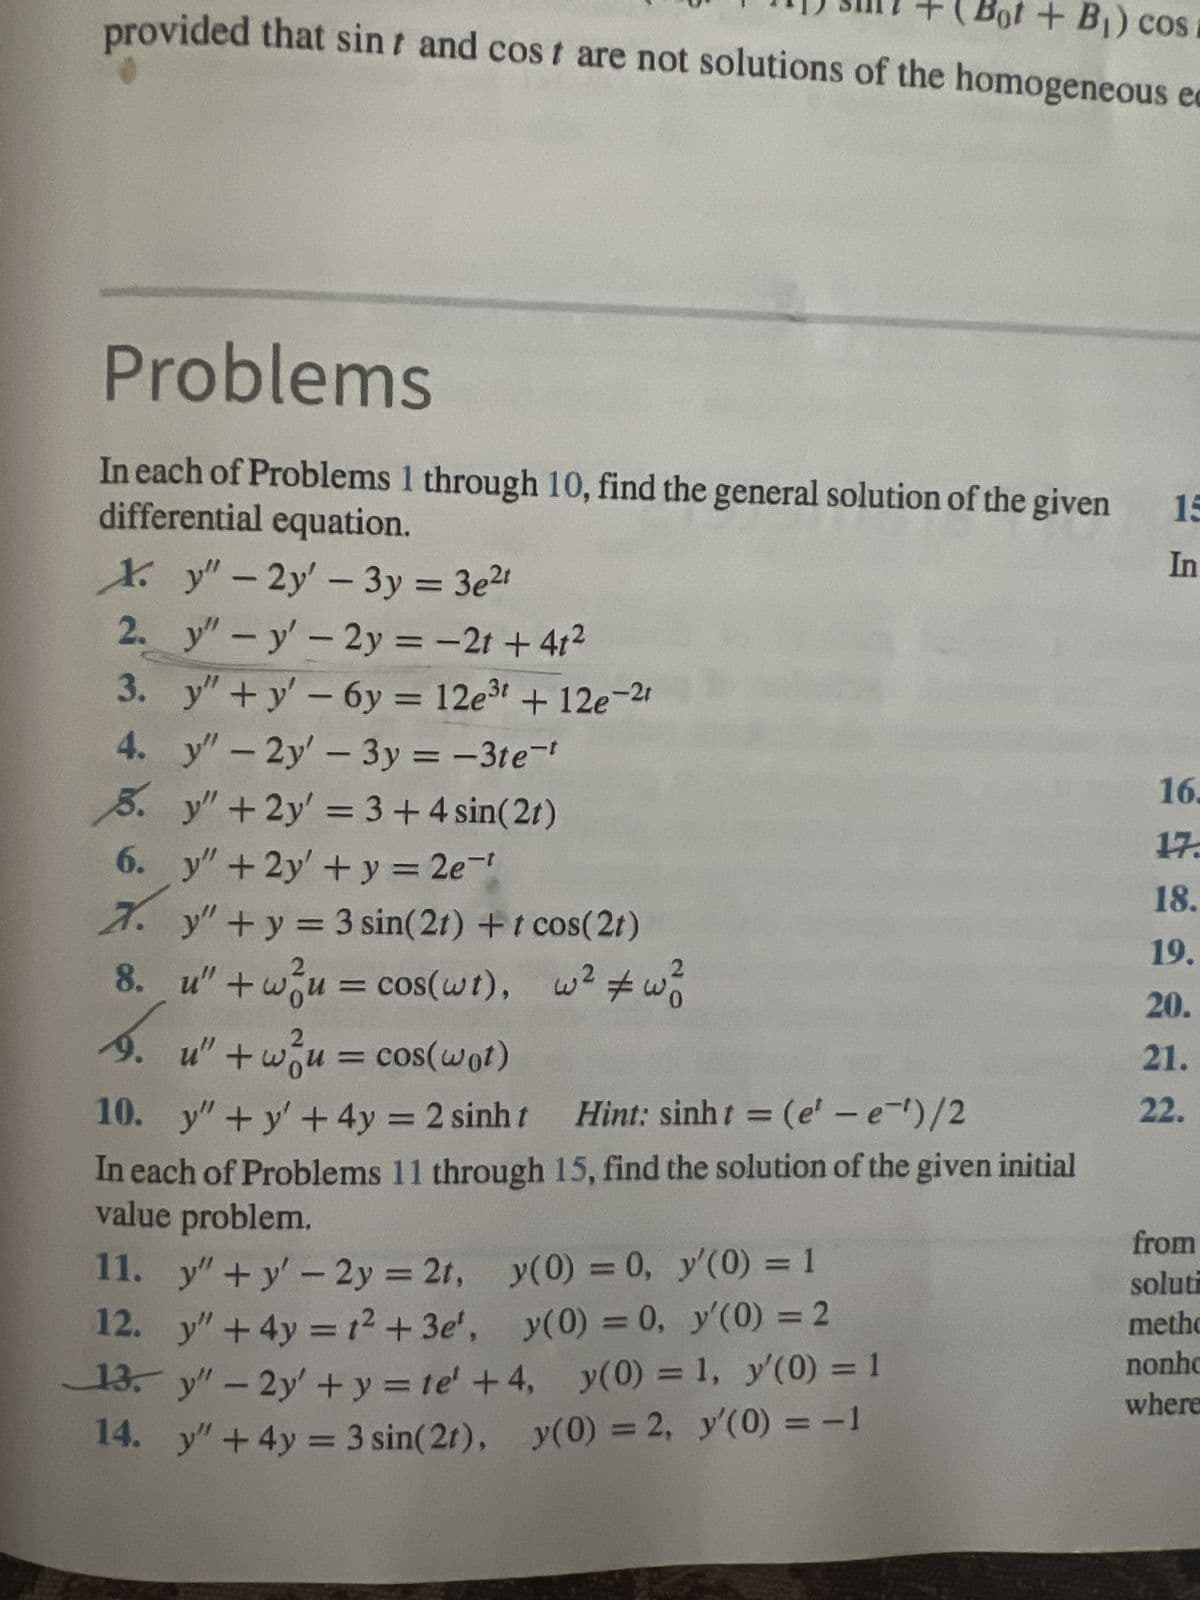 (Bot + B₁) cos i
provided that sint and cost are not solutions of the homogeneous e
Problems
In each of Problems 1 through 10, find the general solution of the given
differential equation.
Xy"-2y' - 3y = 3e²1
2. y" - y' - 2y = -2t+4t²
3.
4.
do di
y"+y' - 6y = 12e³t + 12e-2t
y" - 2y' - 3y = -3te-¹
5. y" + 2y' = 3 + 4 sin(2t)
6. y" + 2y' + y = 2e-¹
7.
y"+y = 3 sin(21) + t cos(2t)
8. u" + wu = cos(wt), w² #wo
9. u" + wou = cos(wot)
10. y” +y+4y = 2 sinh t
Hint: sinht = (e' – e-')/2
In each of Problems 11 through 15, find the solution of the given initial
value problem.
y(0) = 0,
y'(0) = 1
y(0) = 0,
y'(0) = 2
y(0) =
1, y'(0) = 1
y(0) = 2, y'(0) = -1
11.
y"+y' - 2y = 2t,
12.
y" + 4y = 1² +3e',
13. y" - 2y + y = te' +4,
14. y" + 4y = 3 sin(2t),
15
In
16.
17.
18.
19.
20.
21.
22.
from
soluti
metho
nonho
where